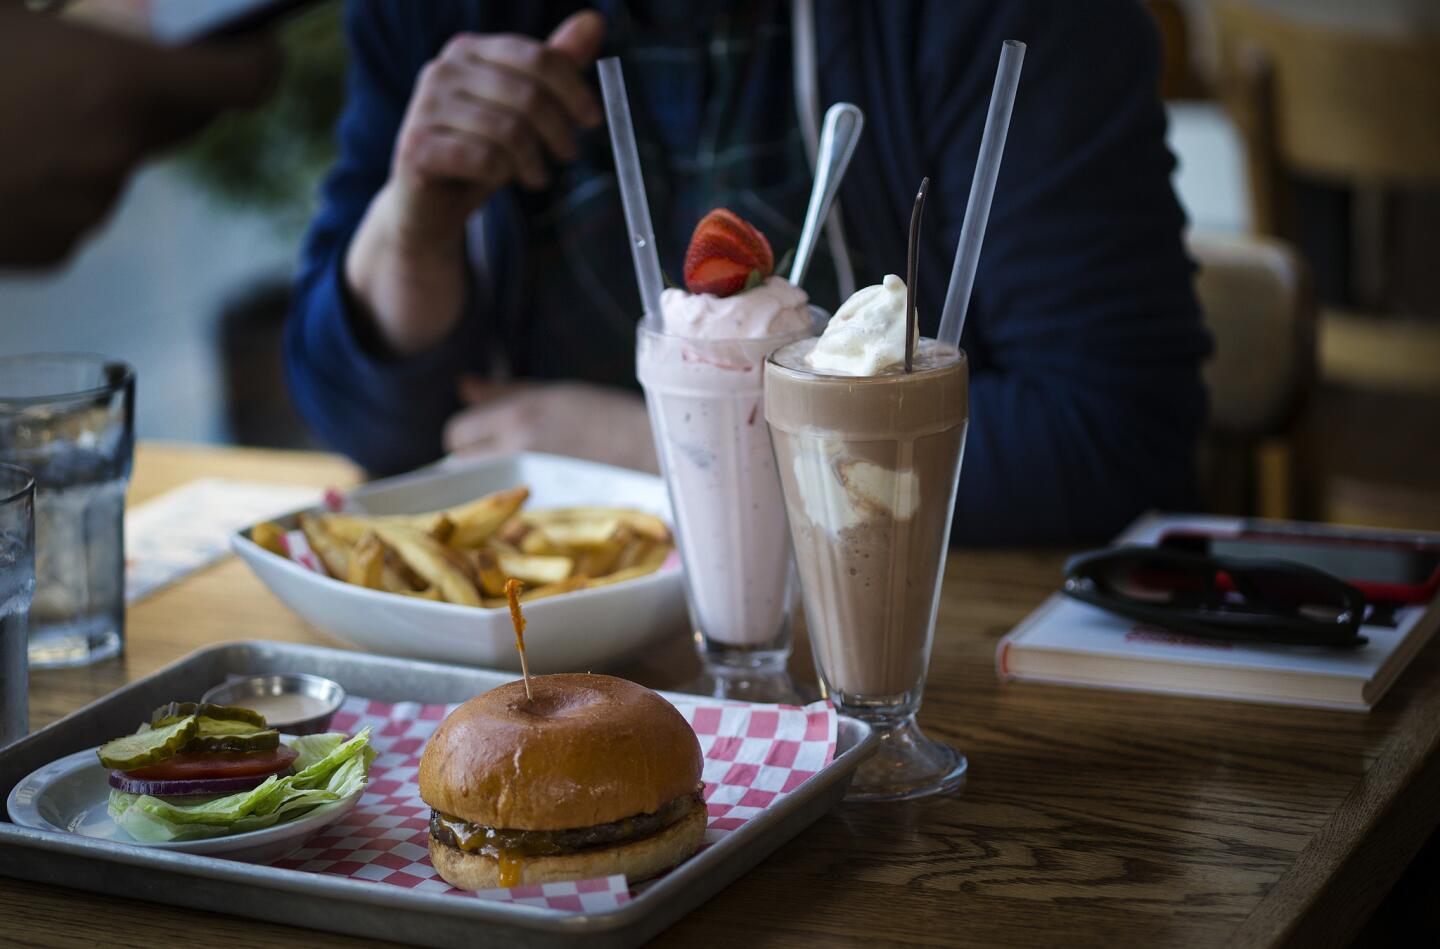 The classic burger, fries and strawberry and chocolate milkshakes at Cassell's.